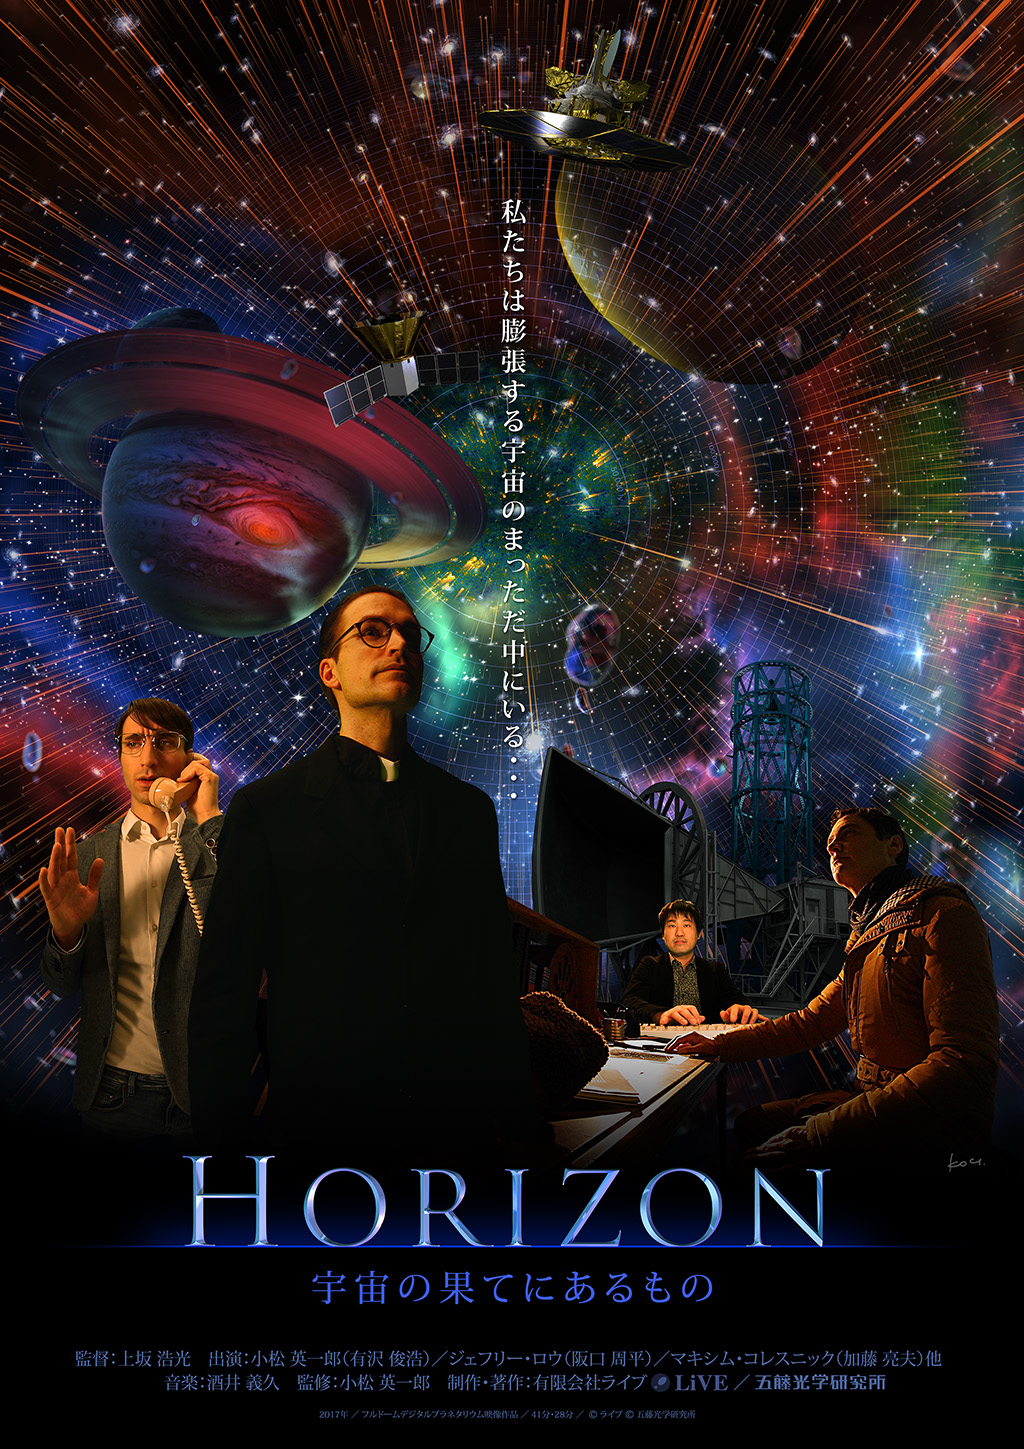 HORIZON:Beyond the Edge of the Visible Universe